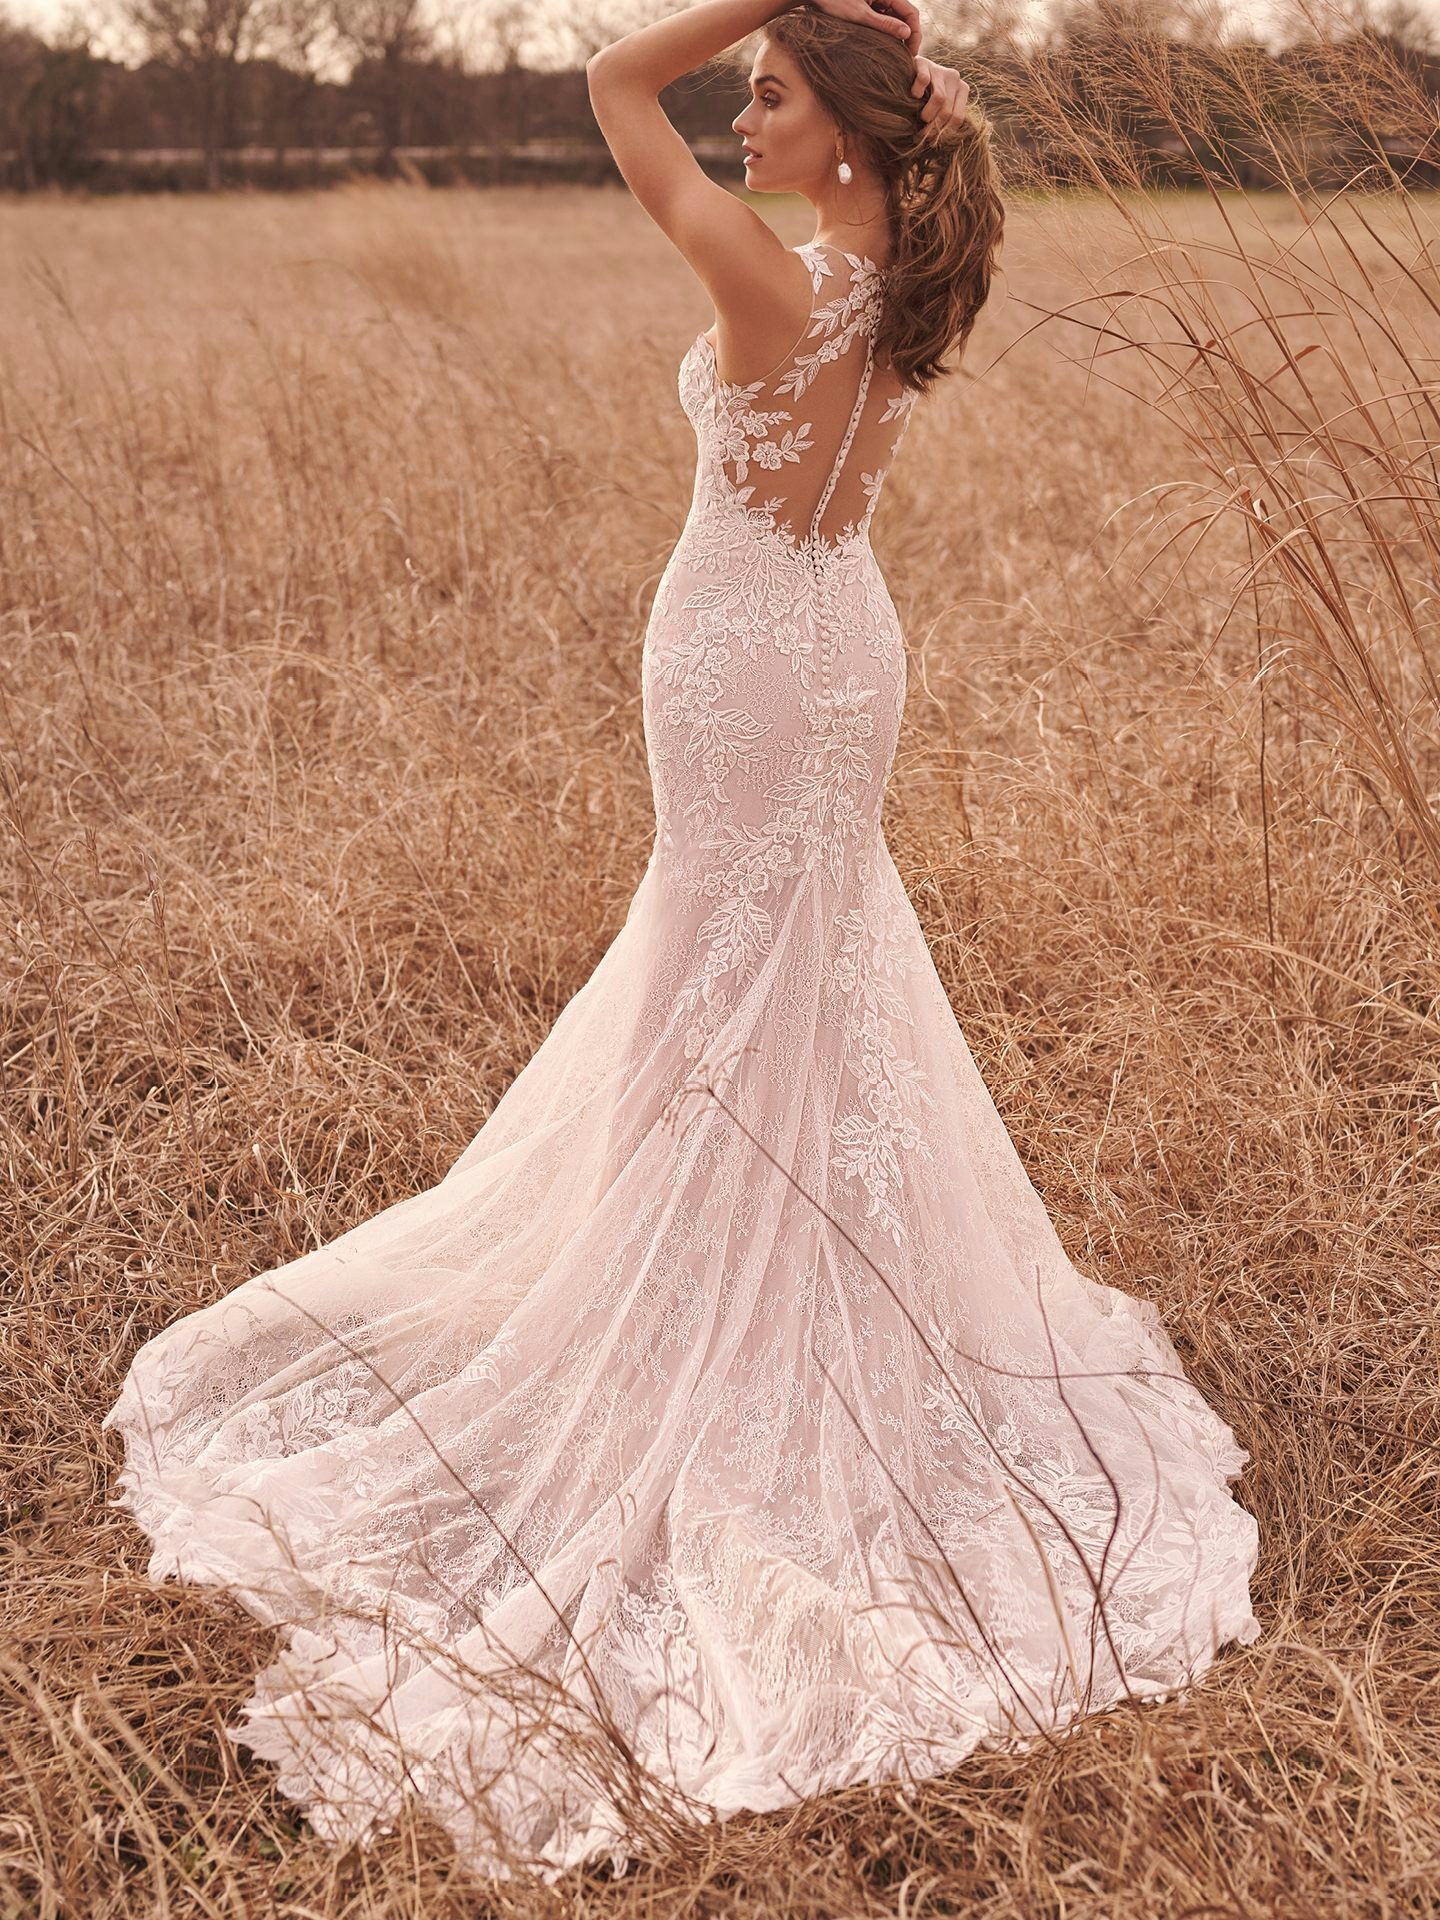 Wedding Dresses ☀ Bridal Gowns | Maggie ...